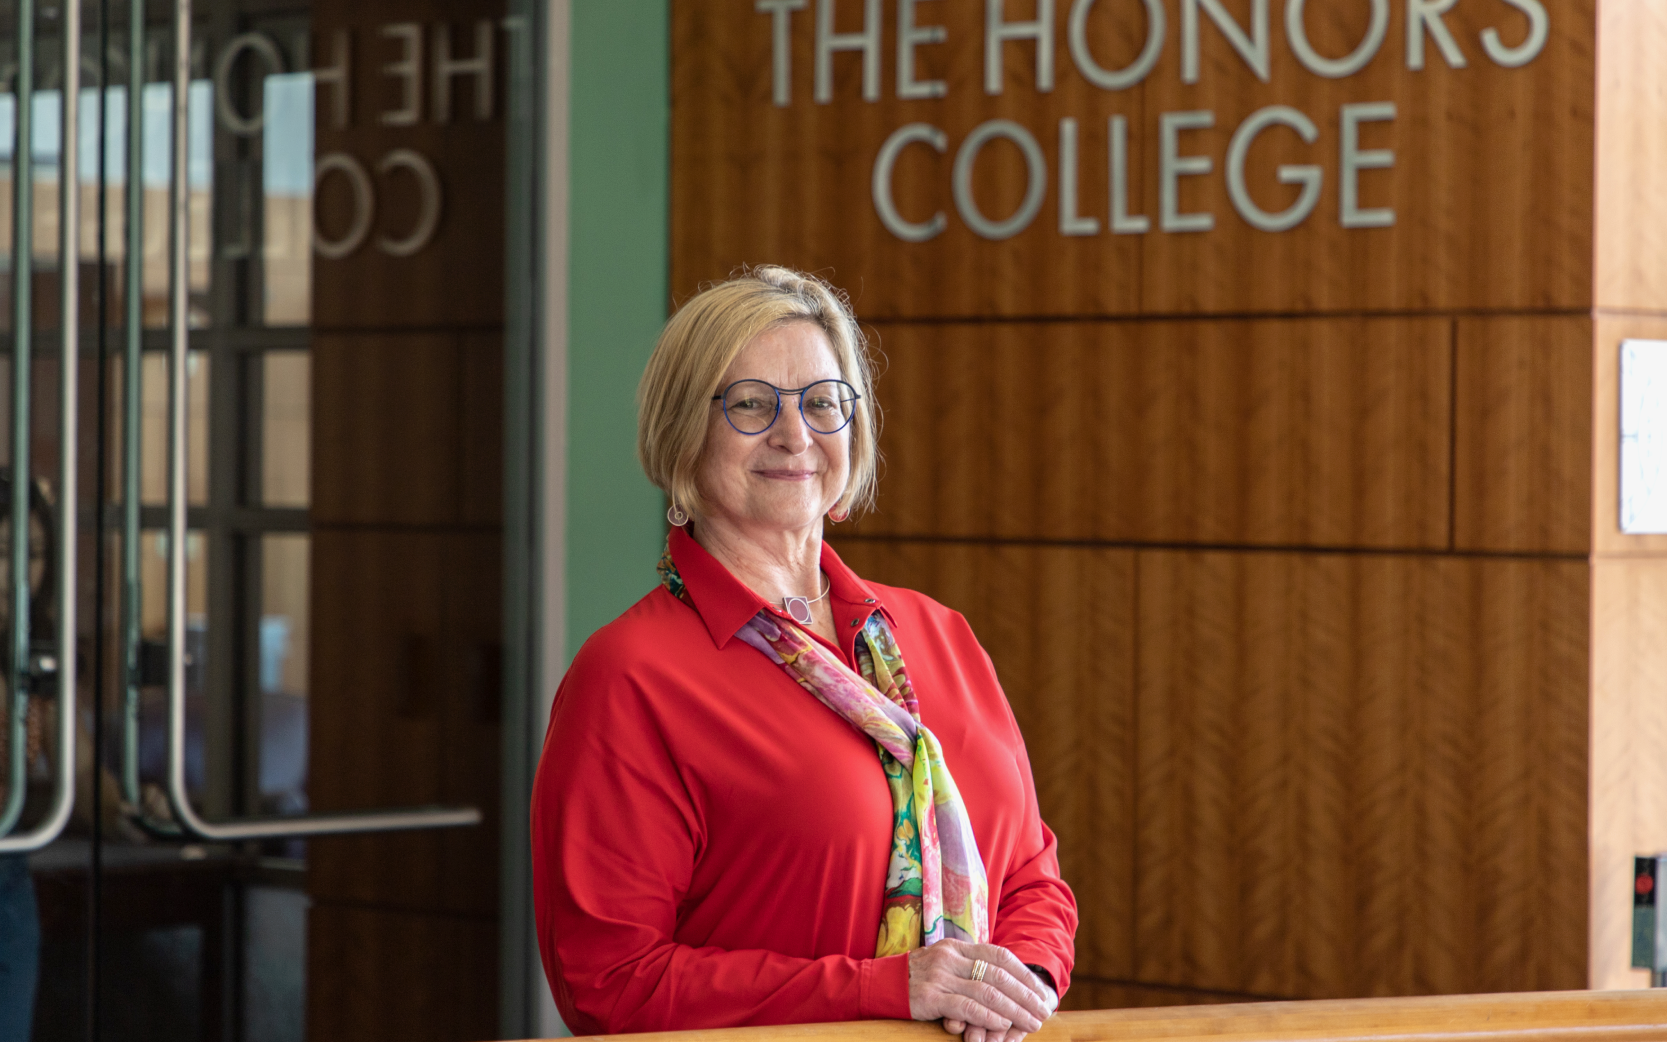 Welcome Dean Heidi Appel to the Honors College!